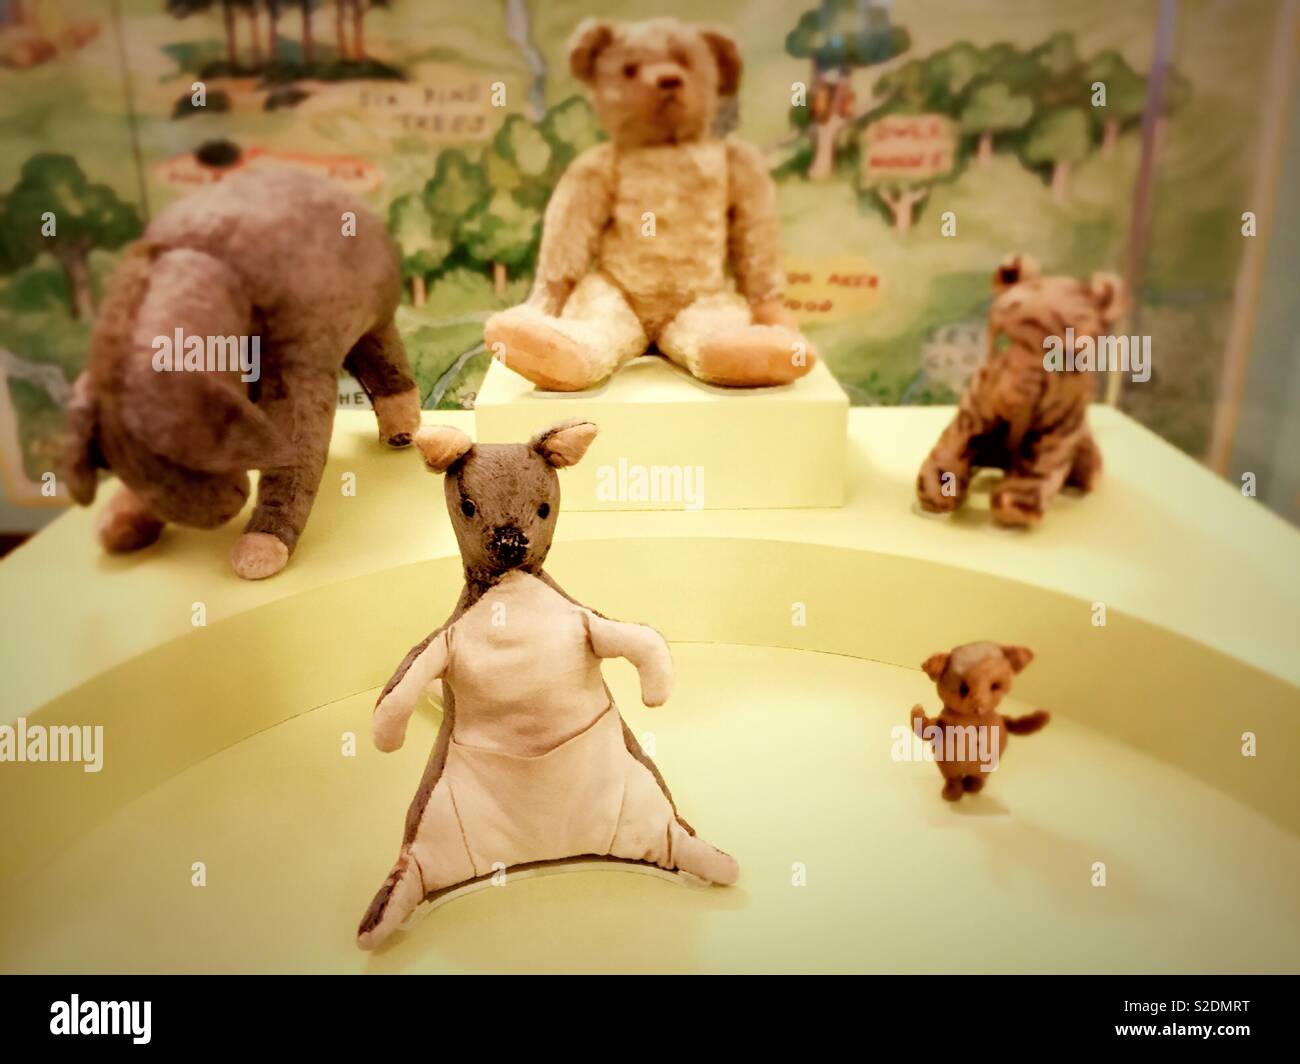 Winnie the Pooh stuffed animals display at the New York public library,  fifth Avenue, NYC, USA Stock Photo - Alamy